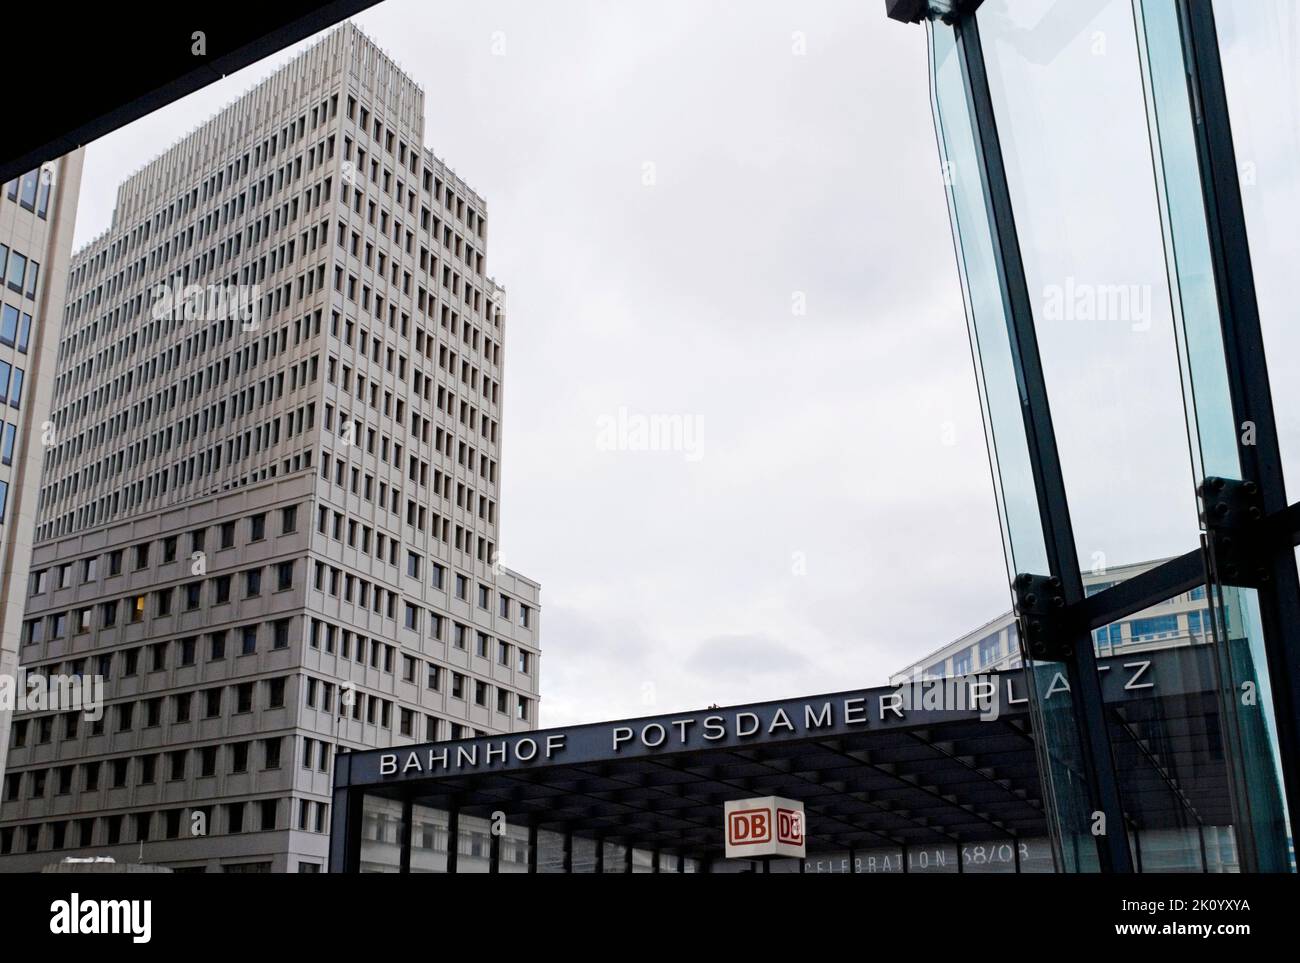 exteriors of Potsdamer Platz train station and office building - Berlin - Germany Stock Photo